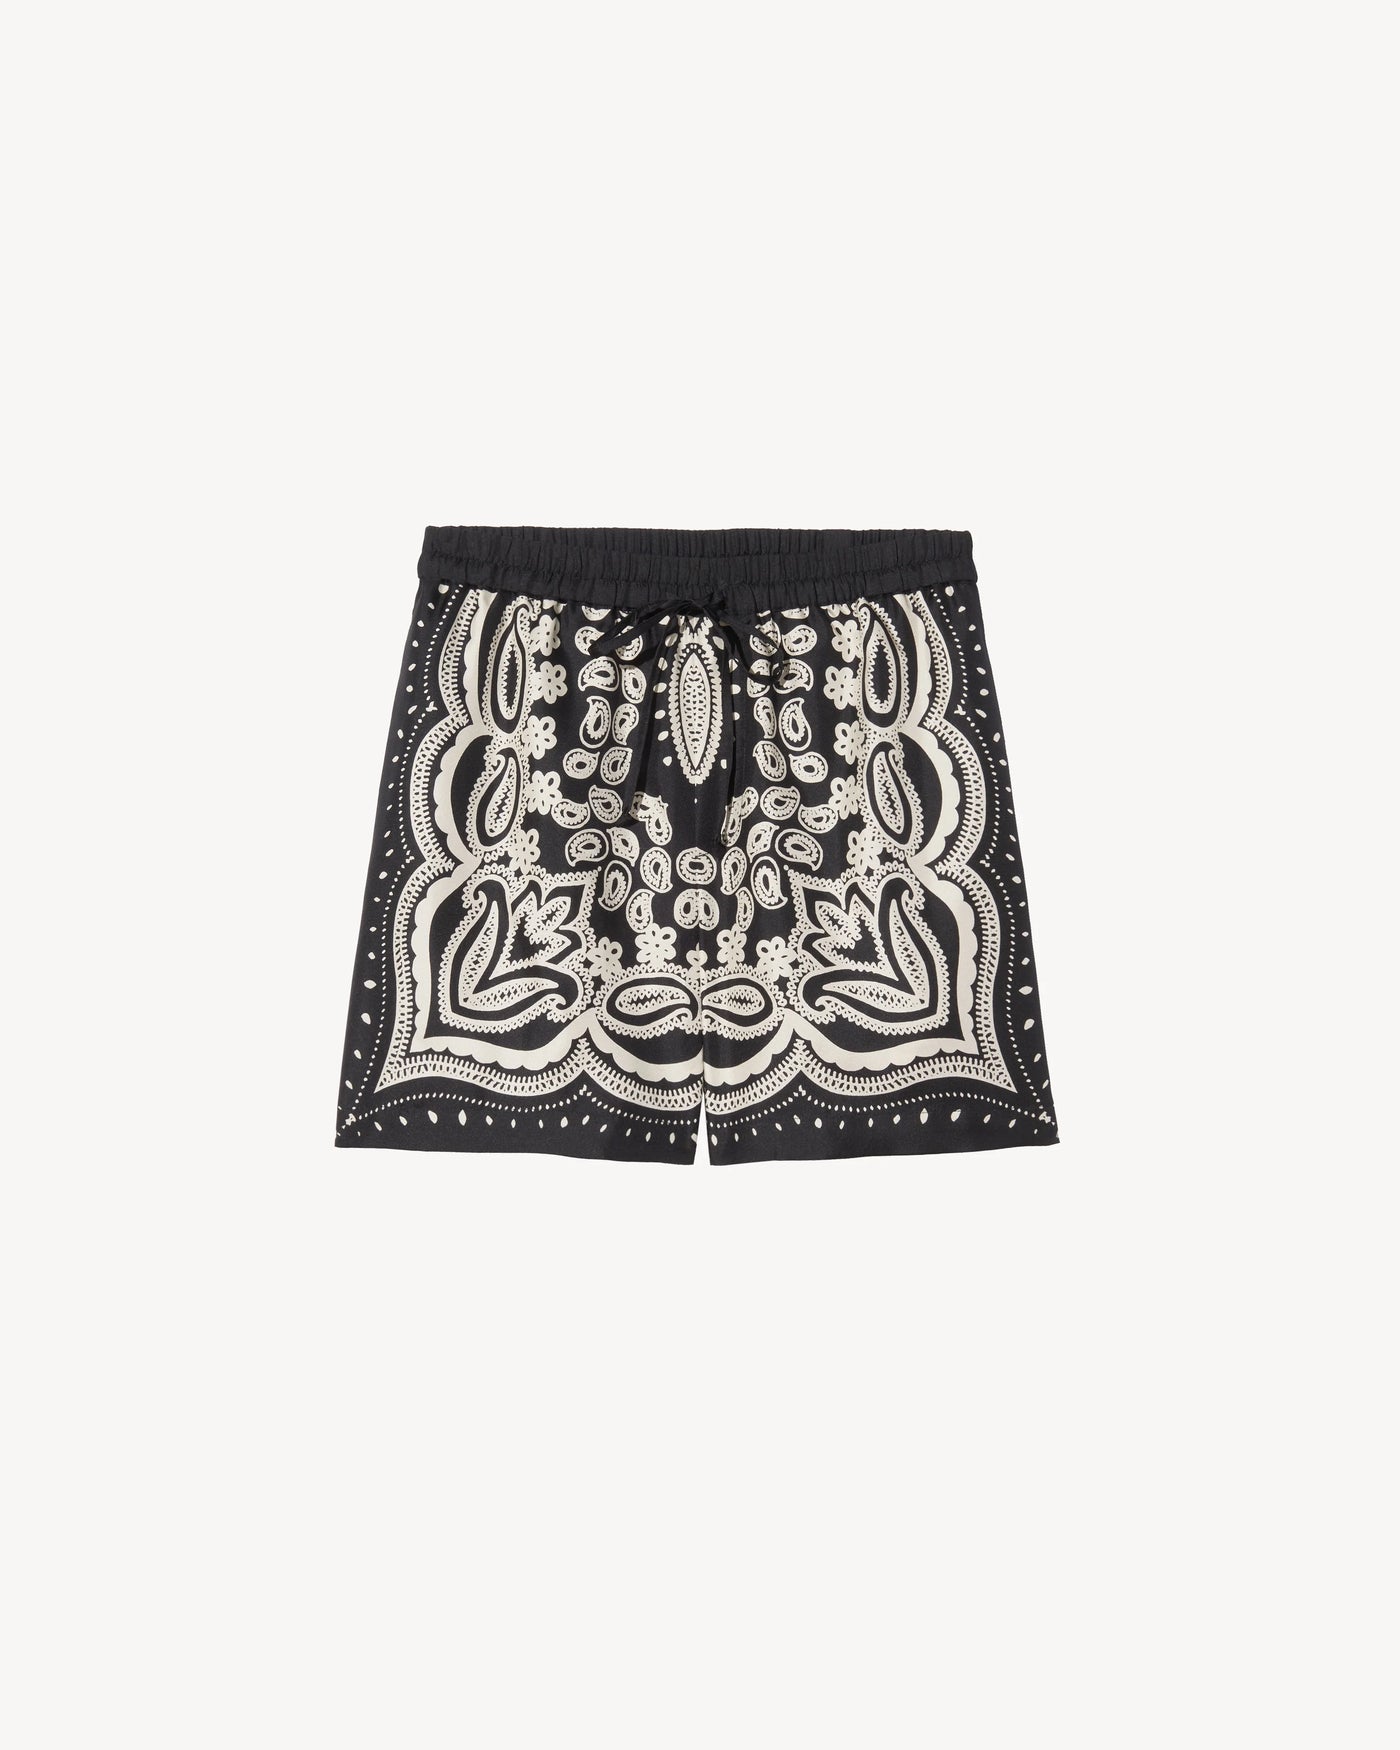 FRANCES SILK SHORT IN BLACK AND IVORY BANDANA - Romi Boutique